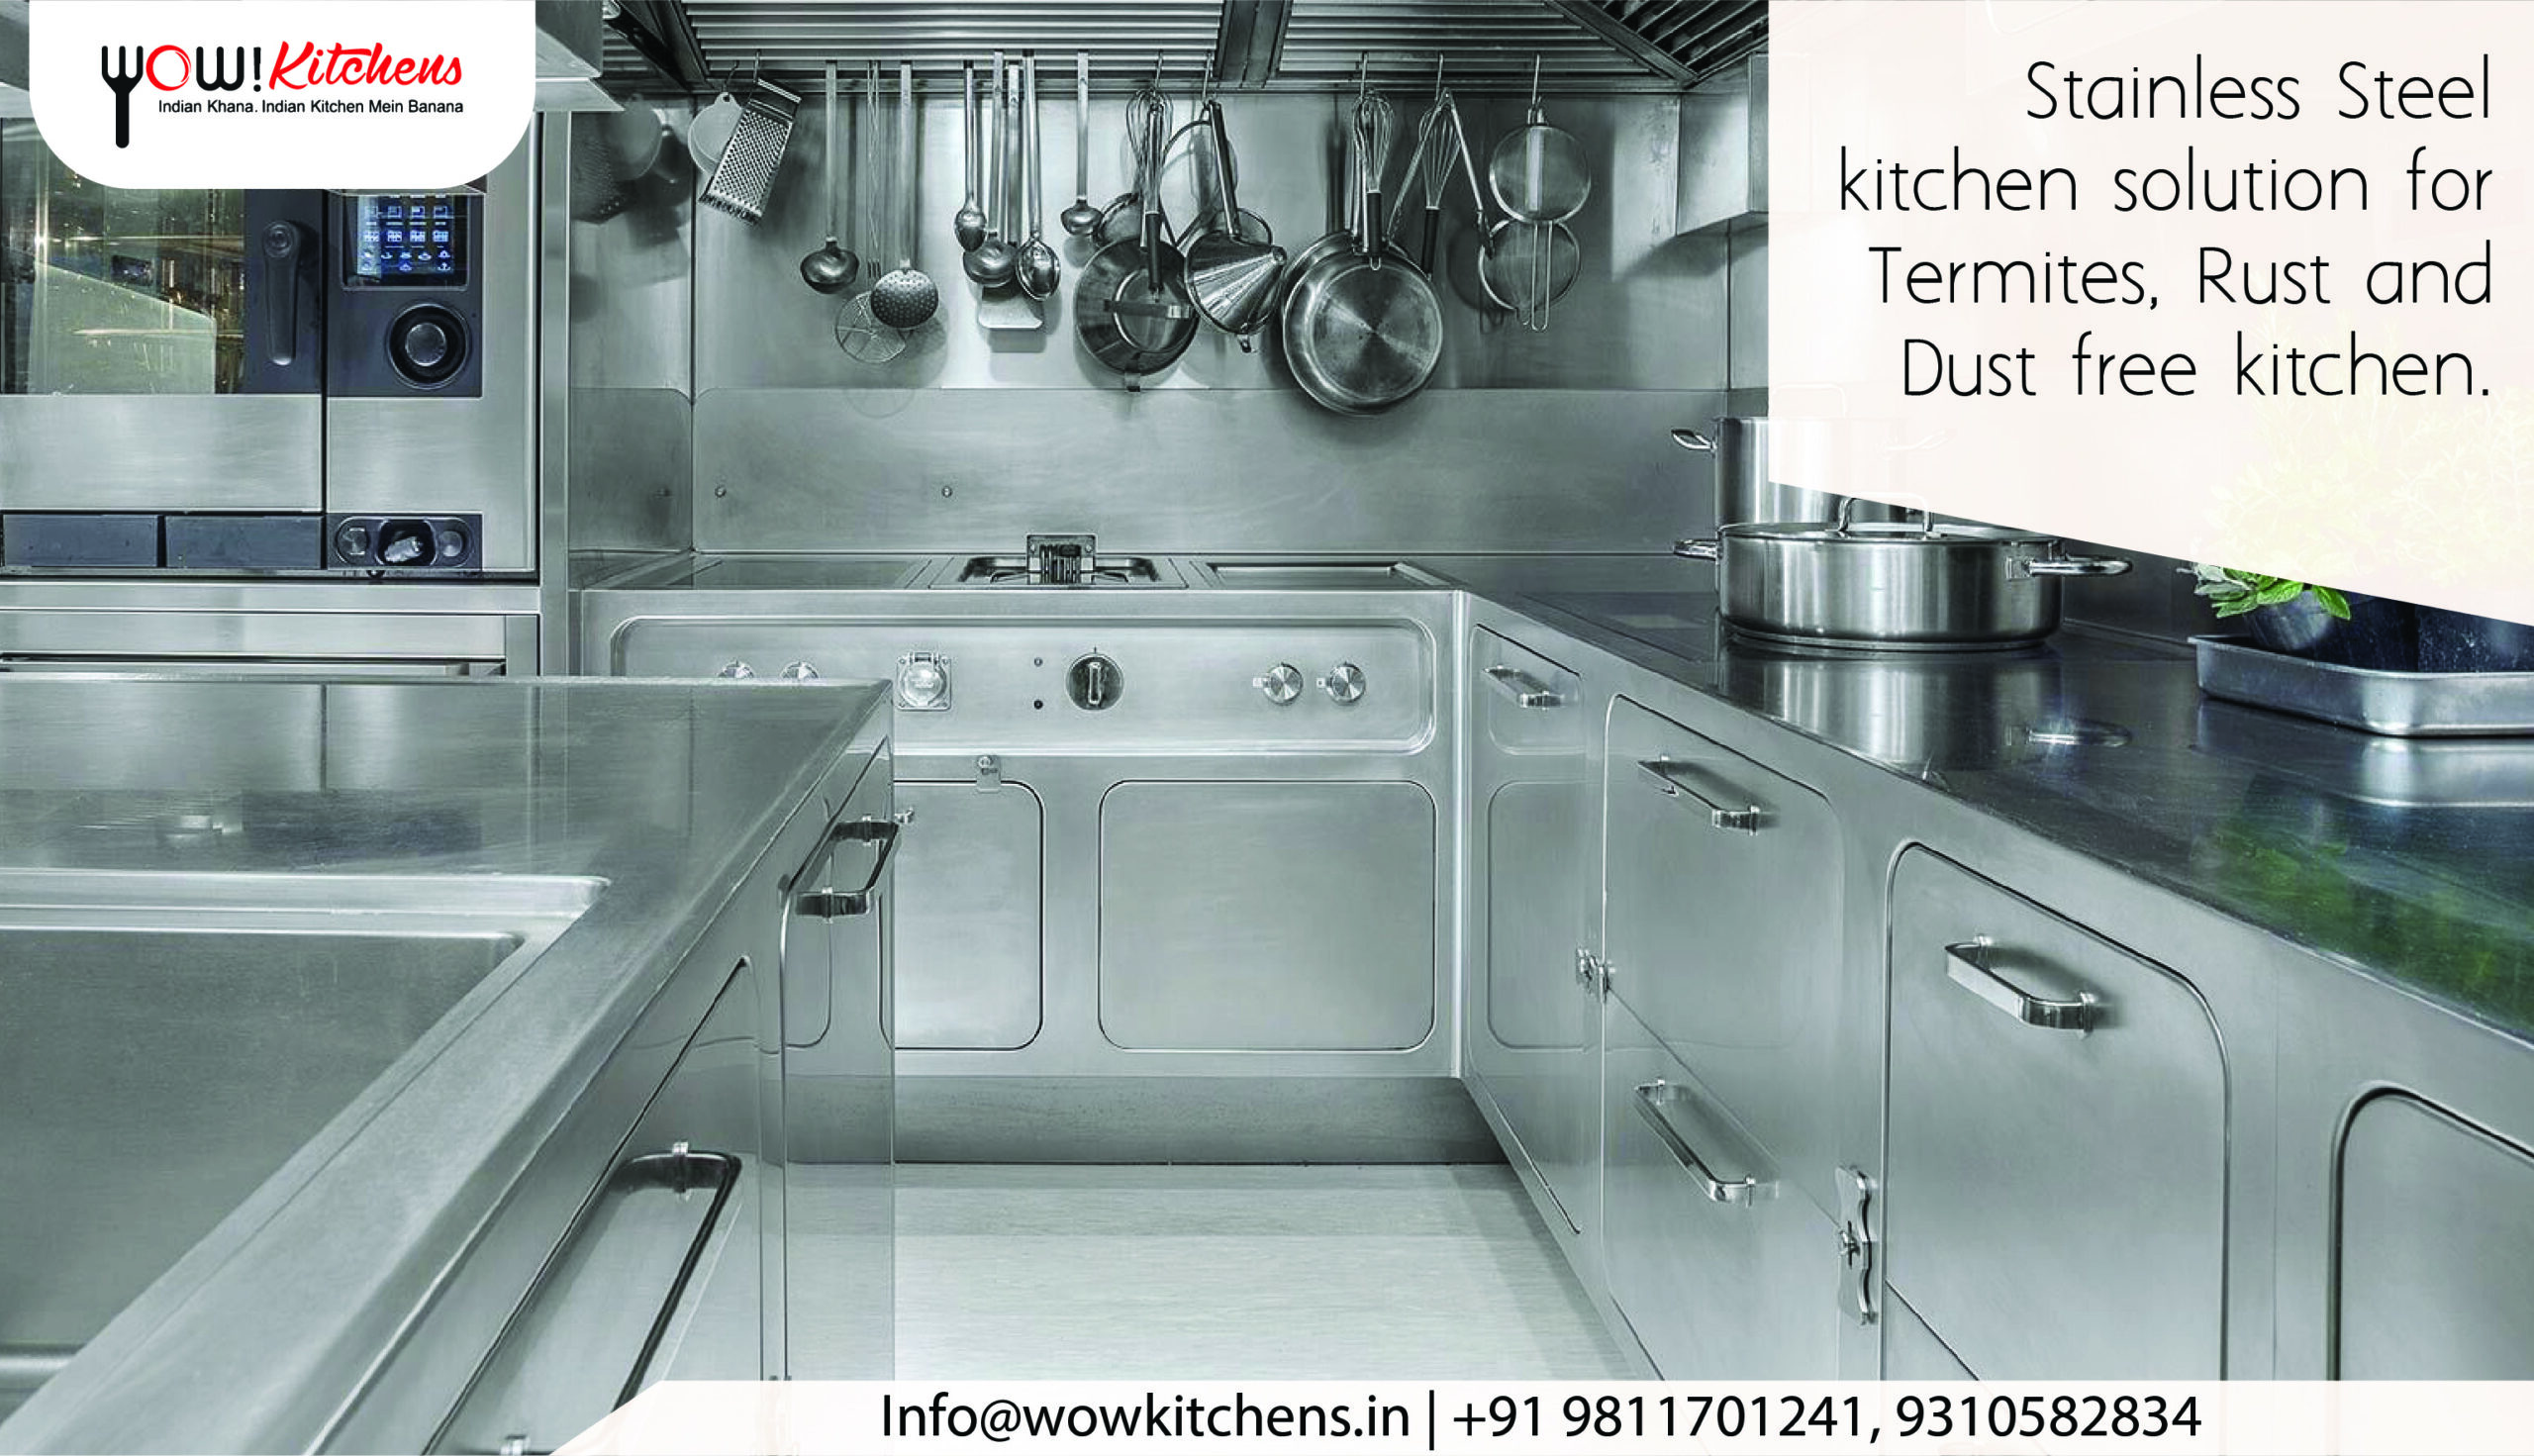 Stainless Steel kitchen solution for Termites, Rust and Dust Free Kitchen